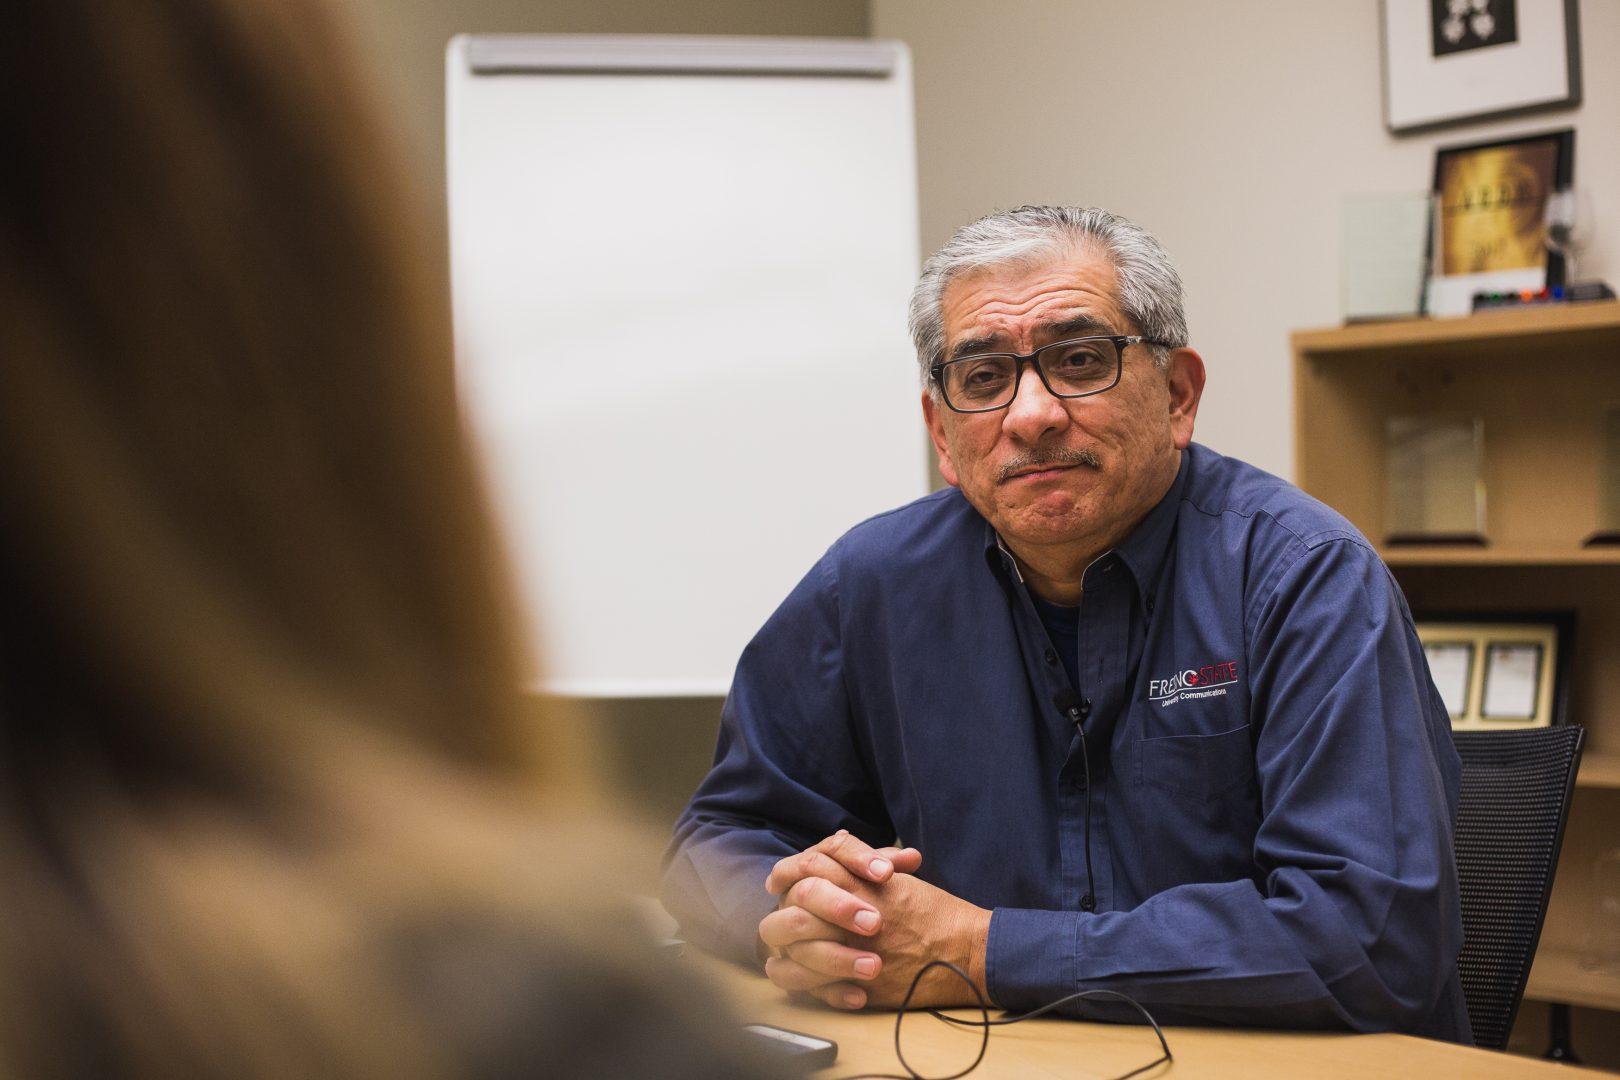 Fresno State public information officer, Tom Uribes, who is retiring on Dec. 6, 2017. He sat down with The Collegian to give a one-on-one interview on Dec. 5, 2017. (Alejandro Soto/The Collegian)